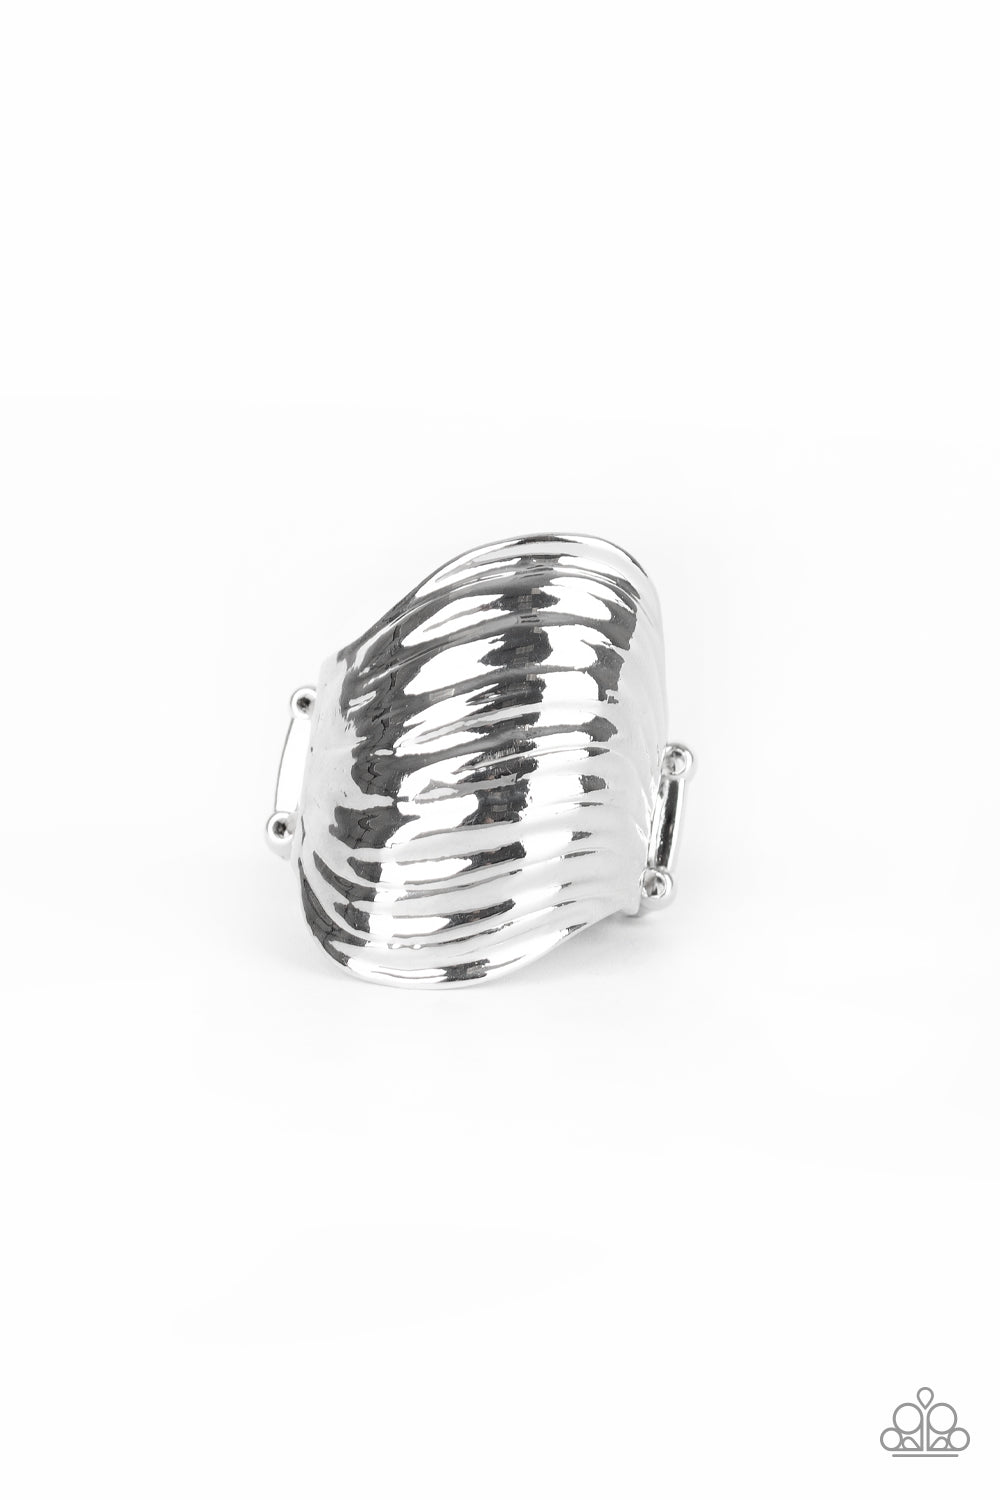 Paparazzi Rings - Made That SWAY - Silver